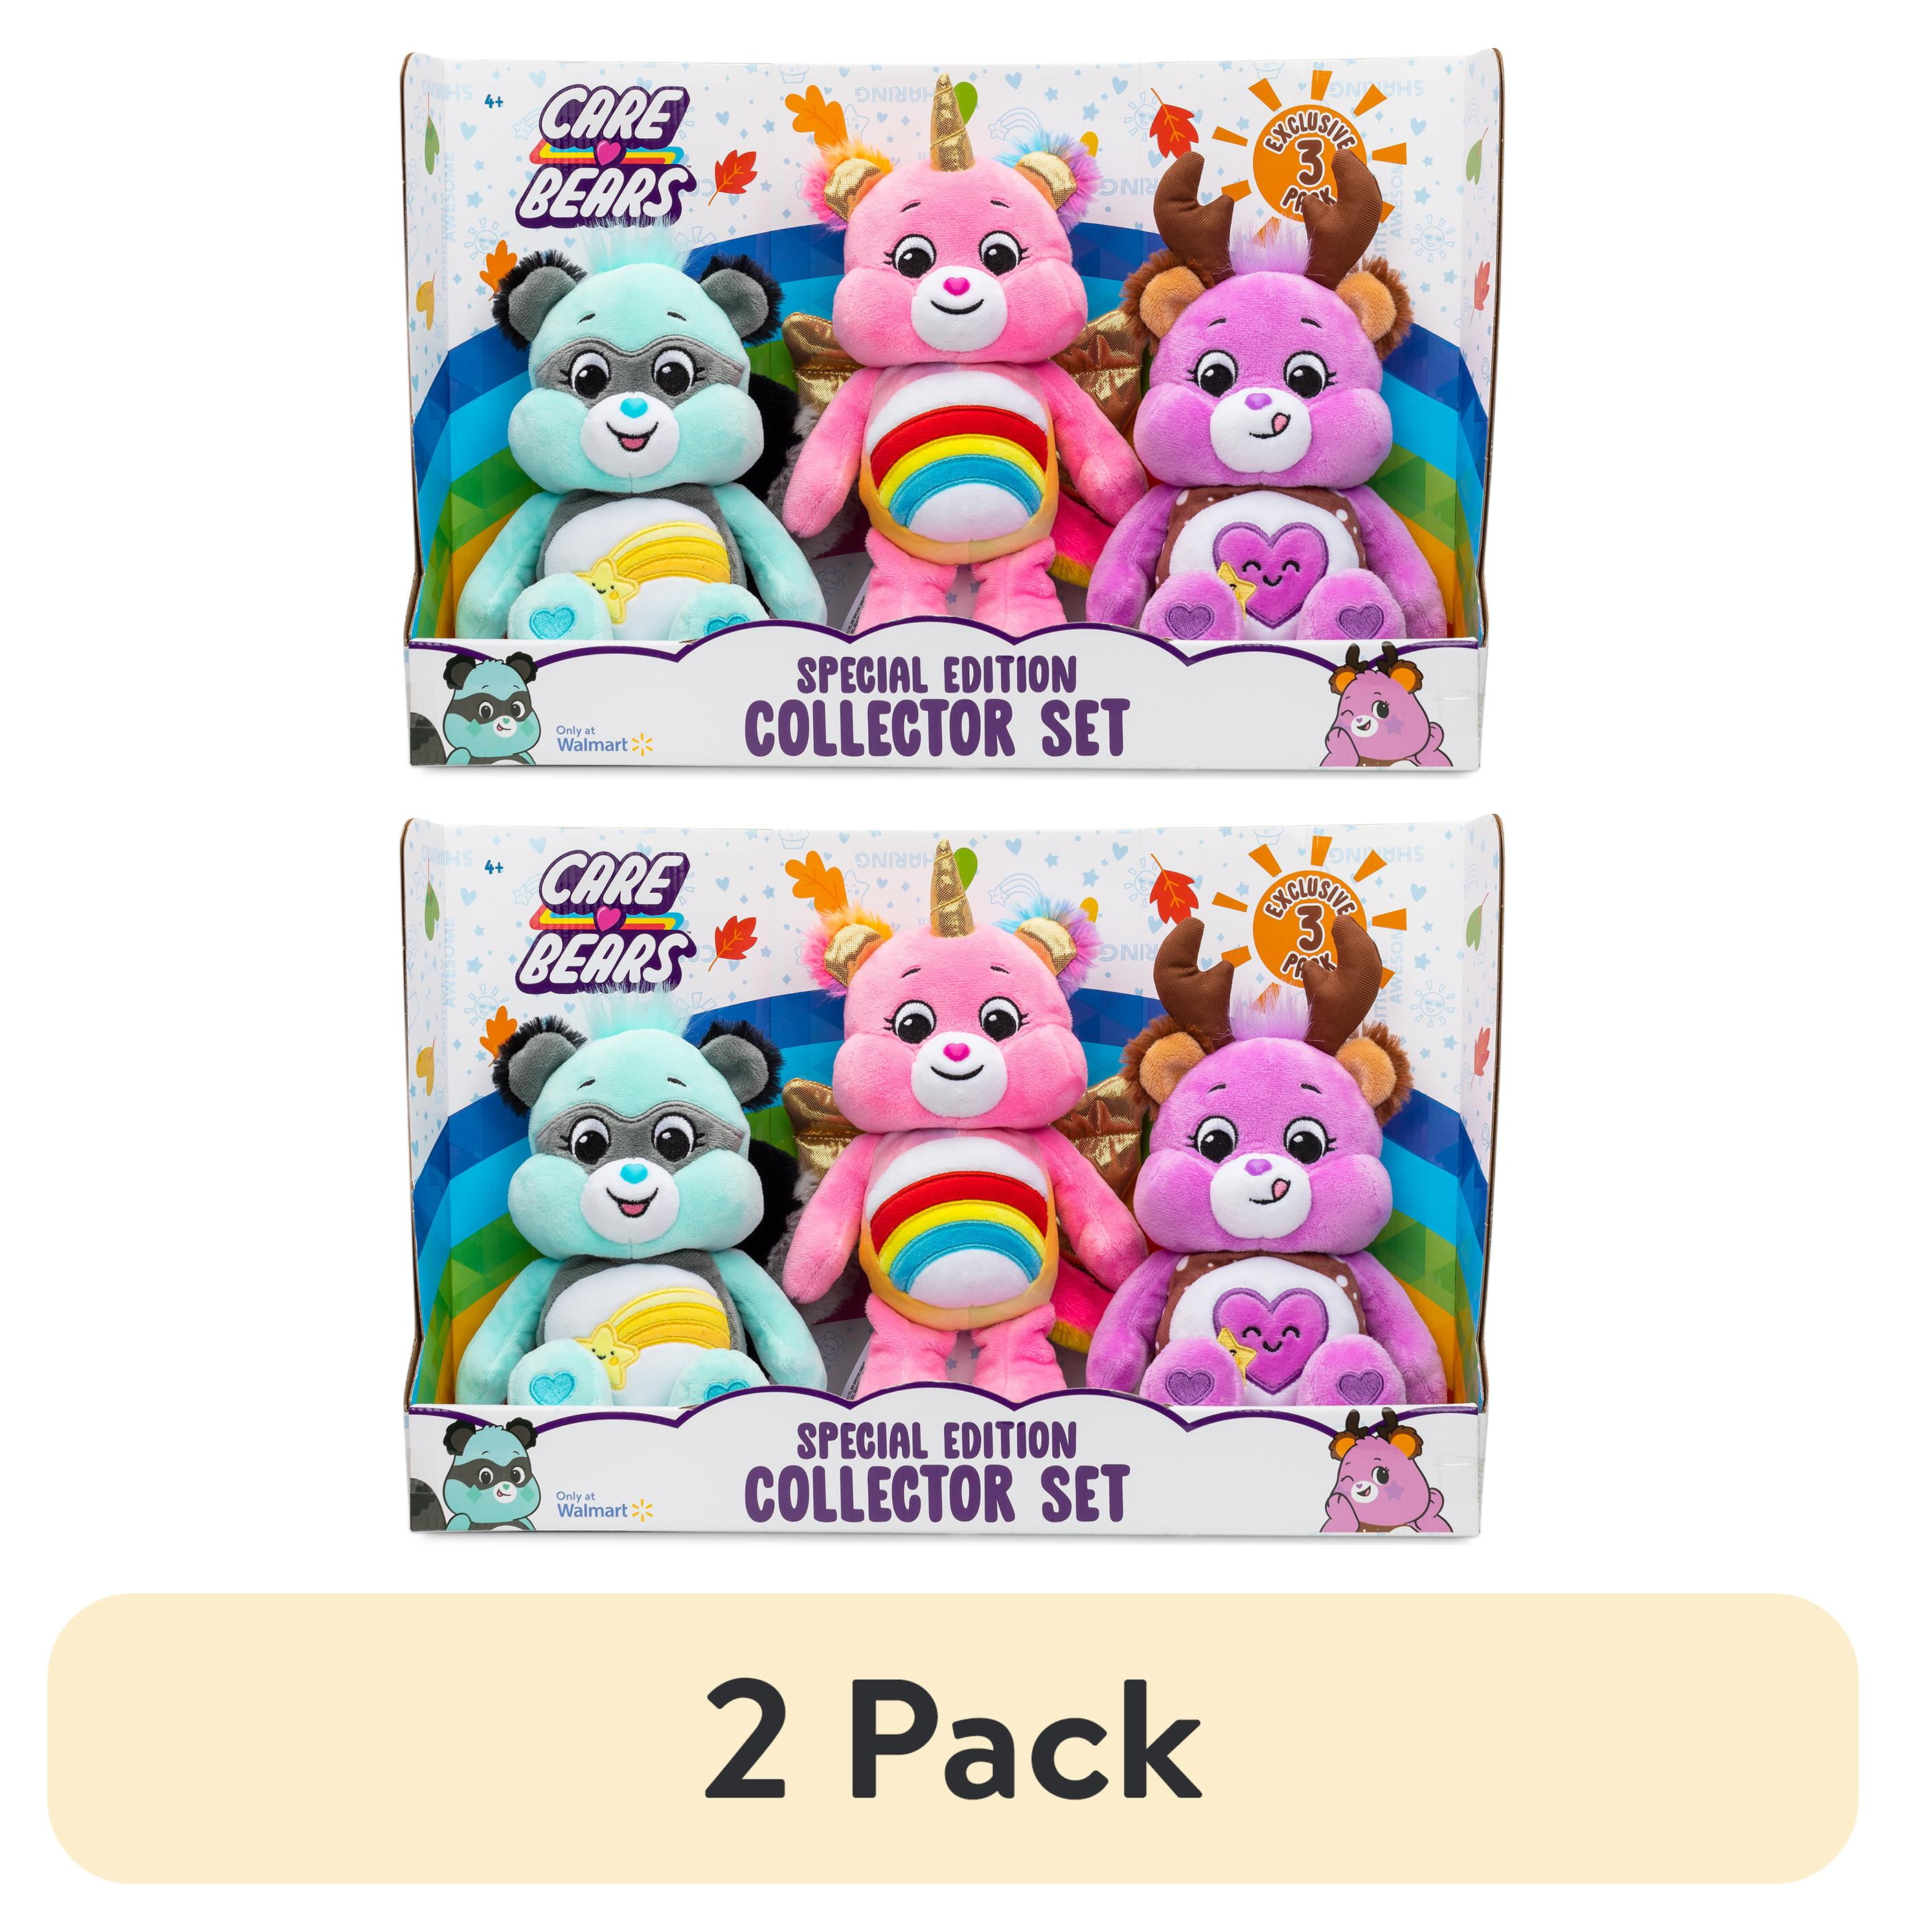 Build-A-Bear Gift Cards, Multipack of 3